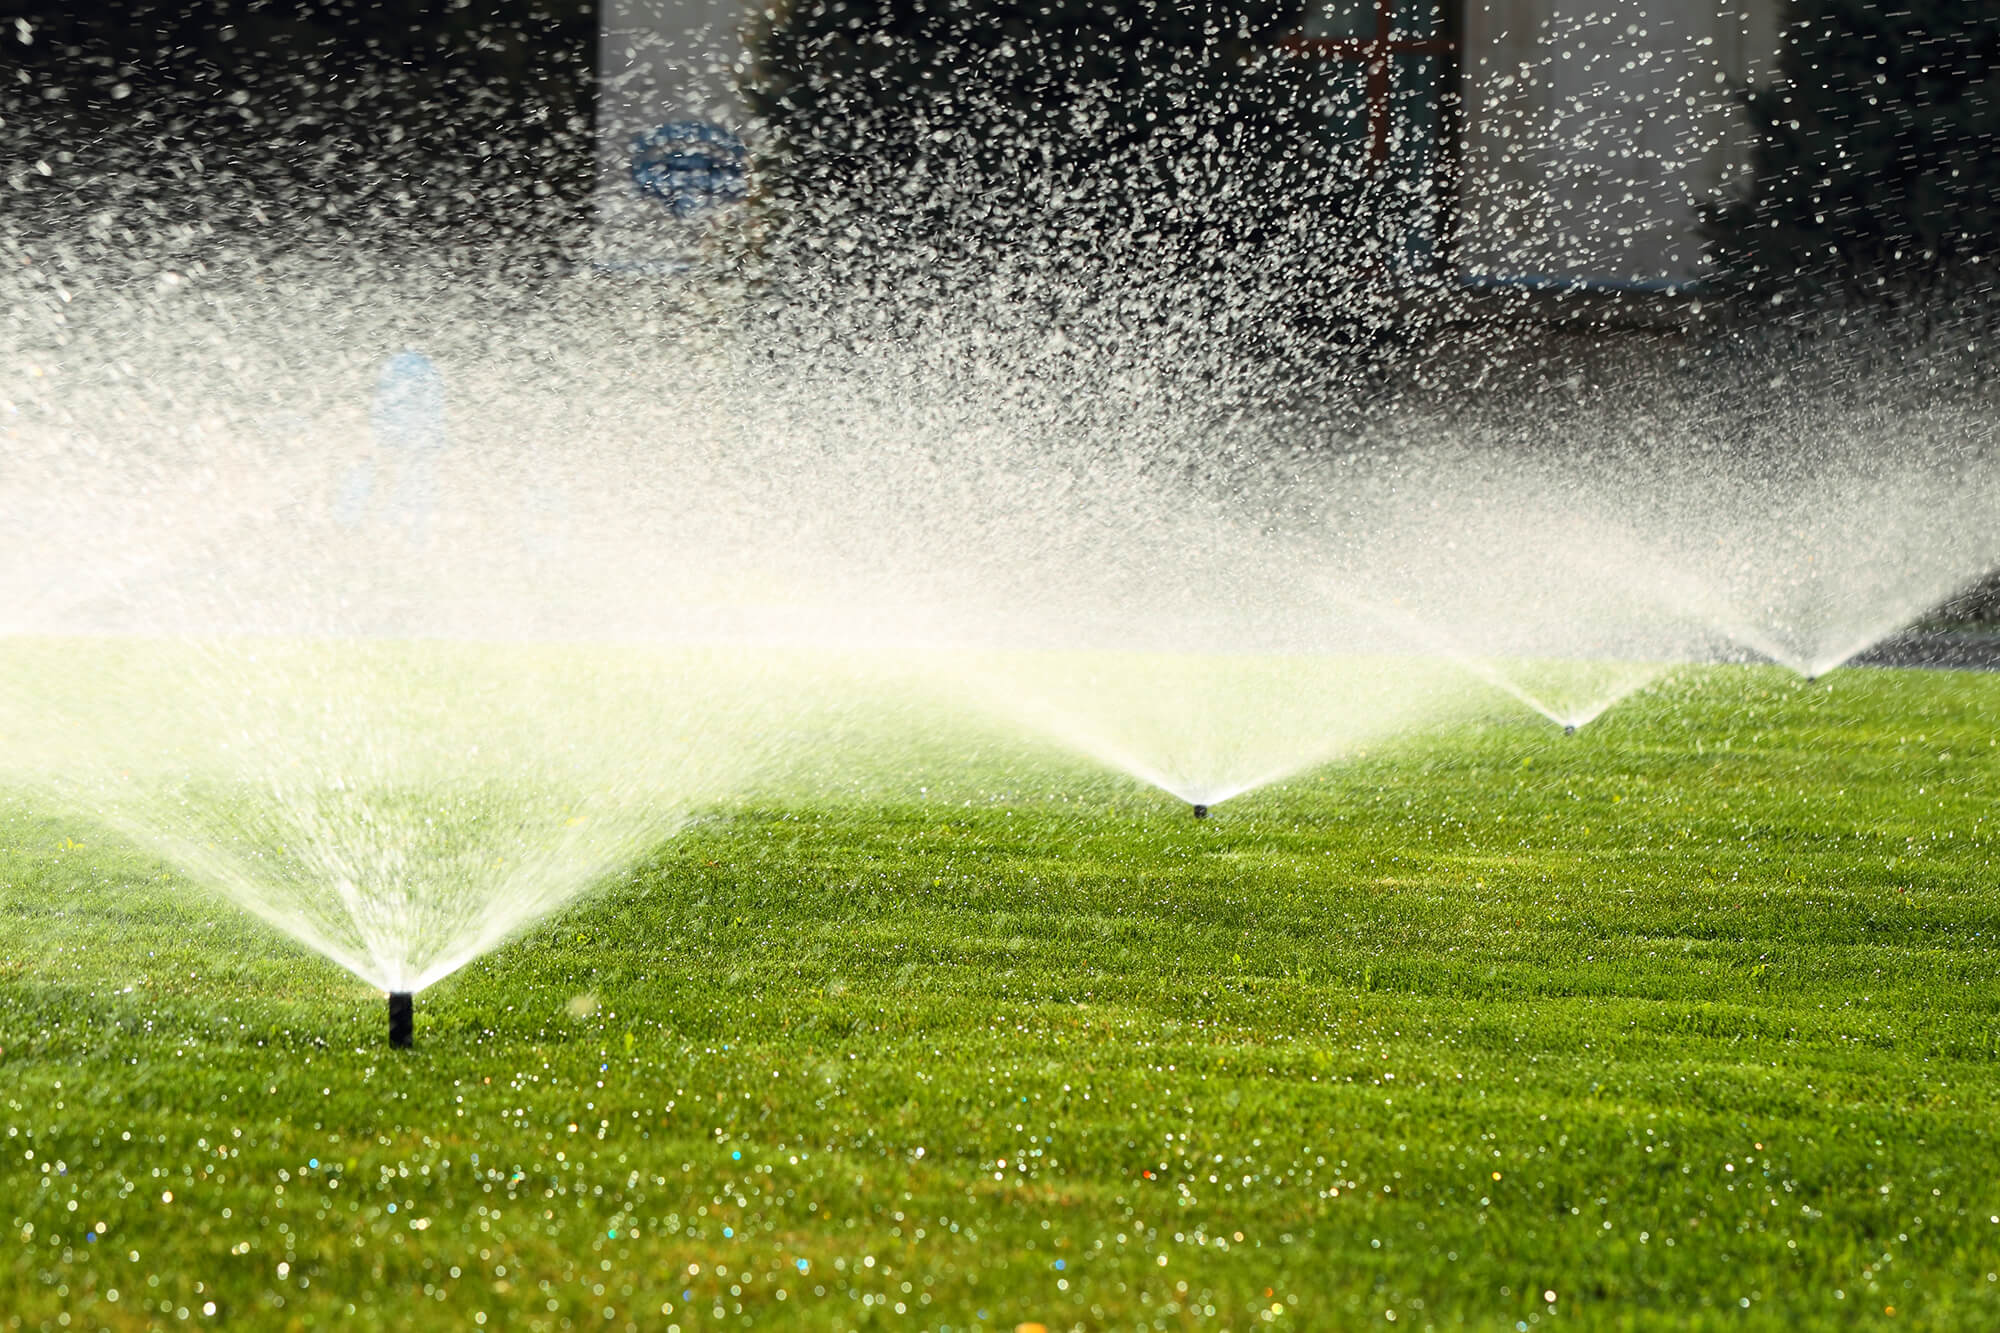 Sprinklers watering a large section of grass